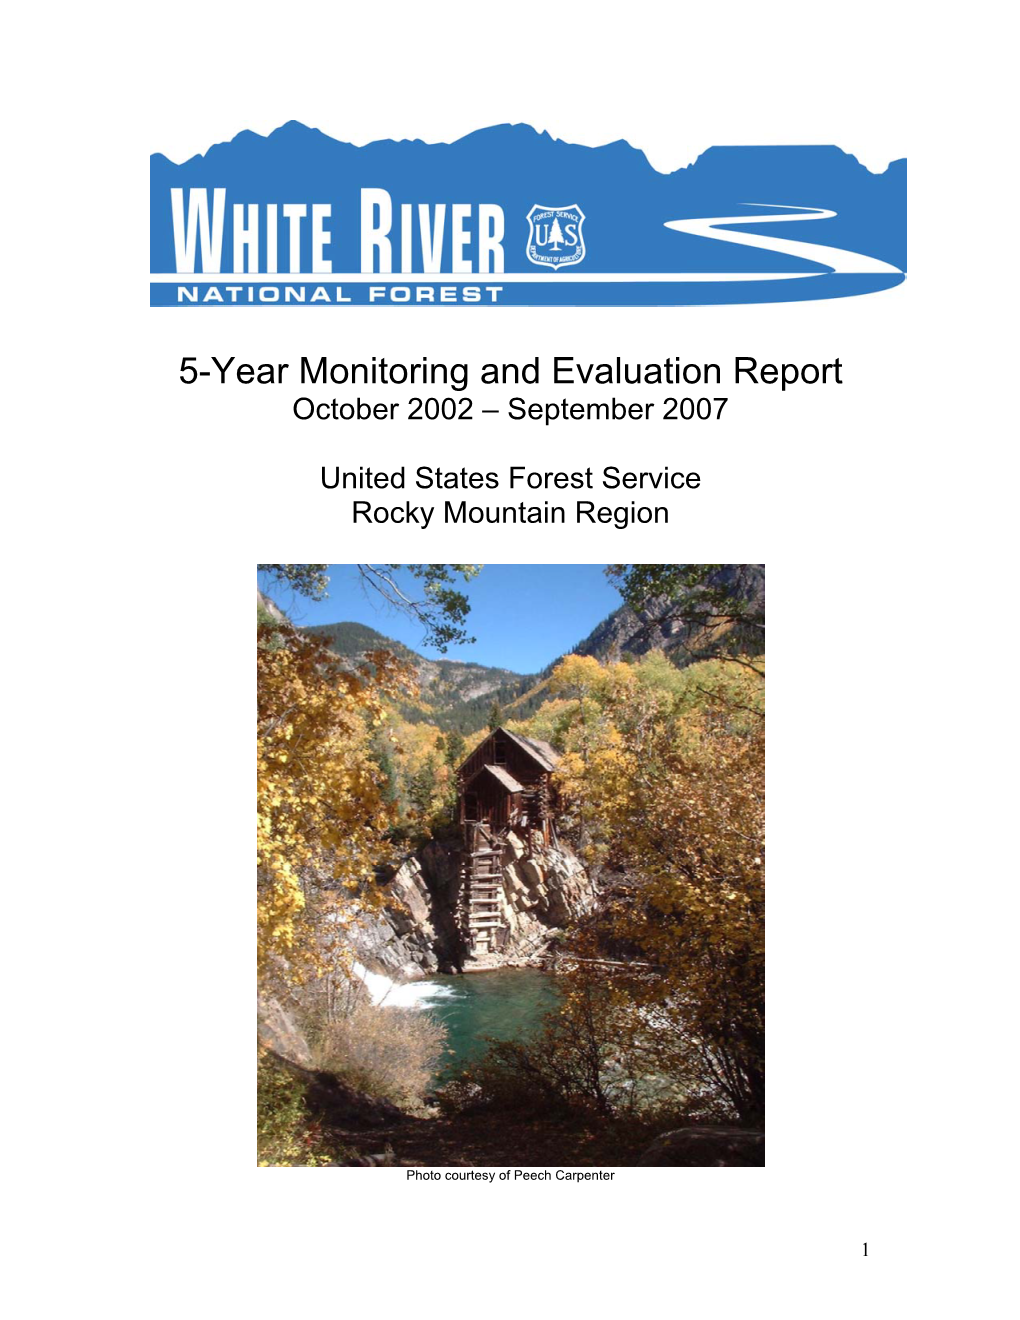 5-Year Monitoring and Evaluation Report October 2002 – September 2007